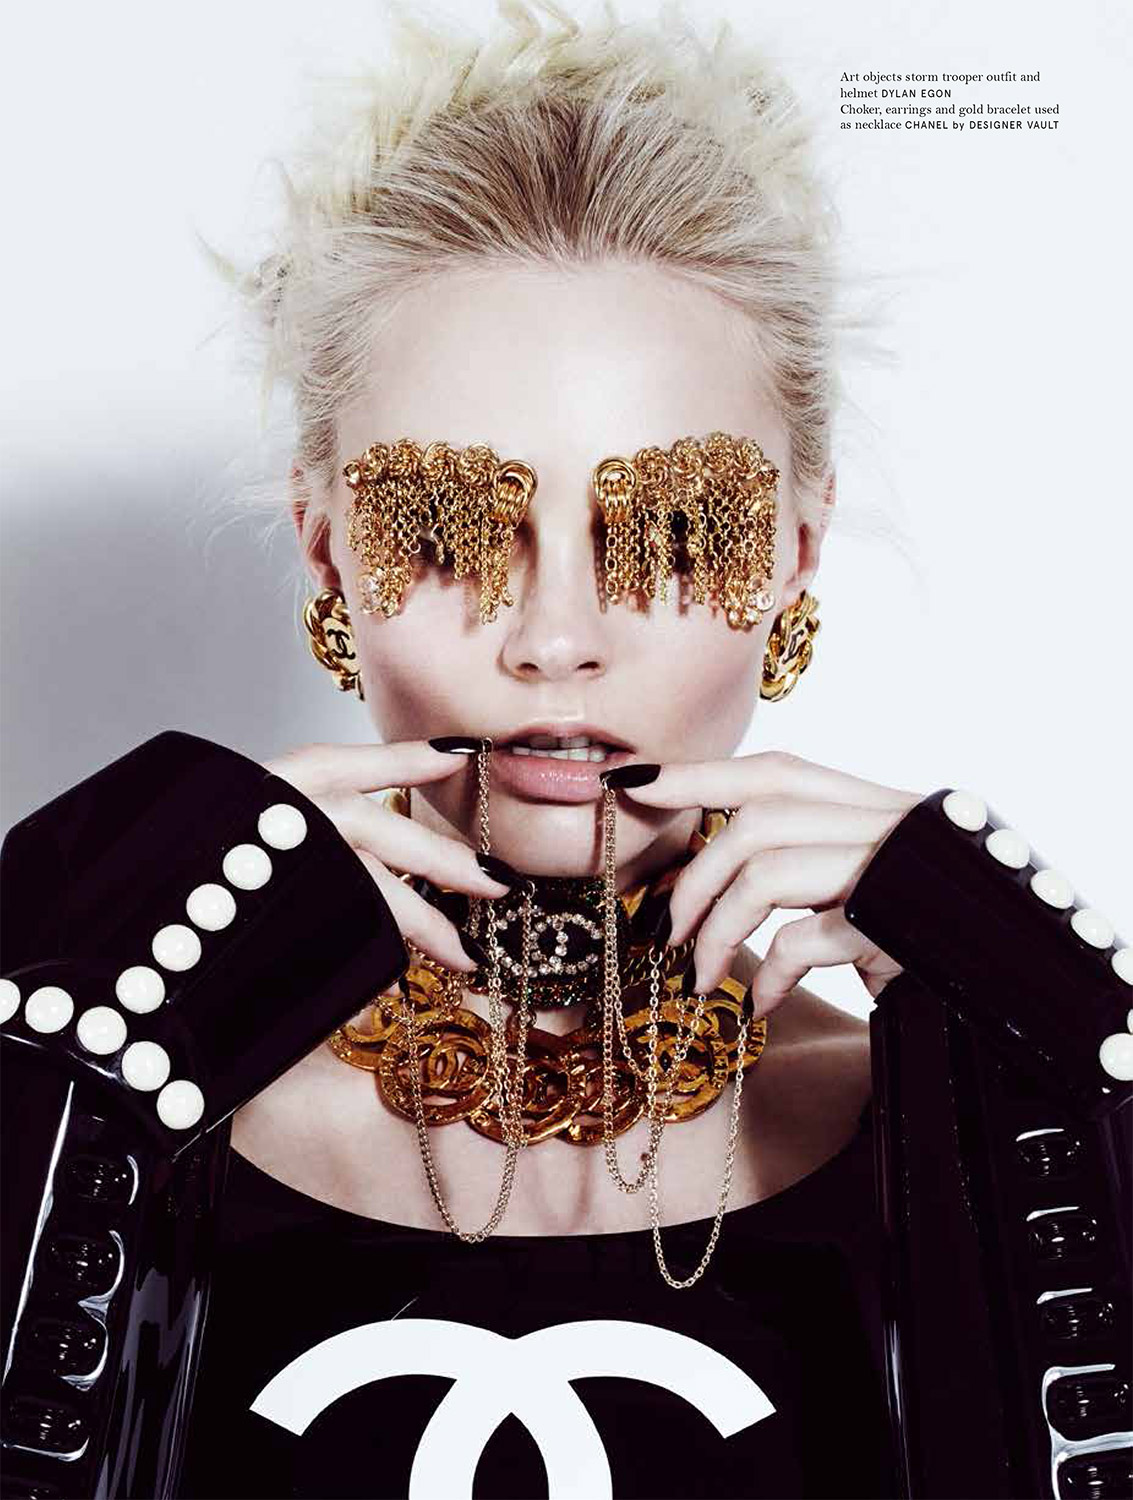 Chanel Temporary Tattoos Beauty Editorial Shoot with model Enly